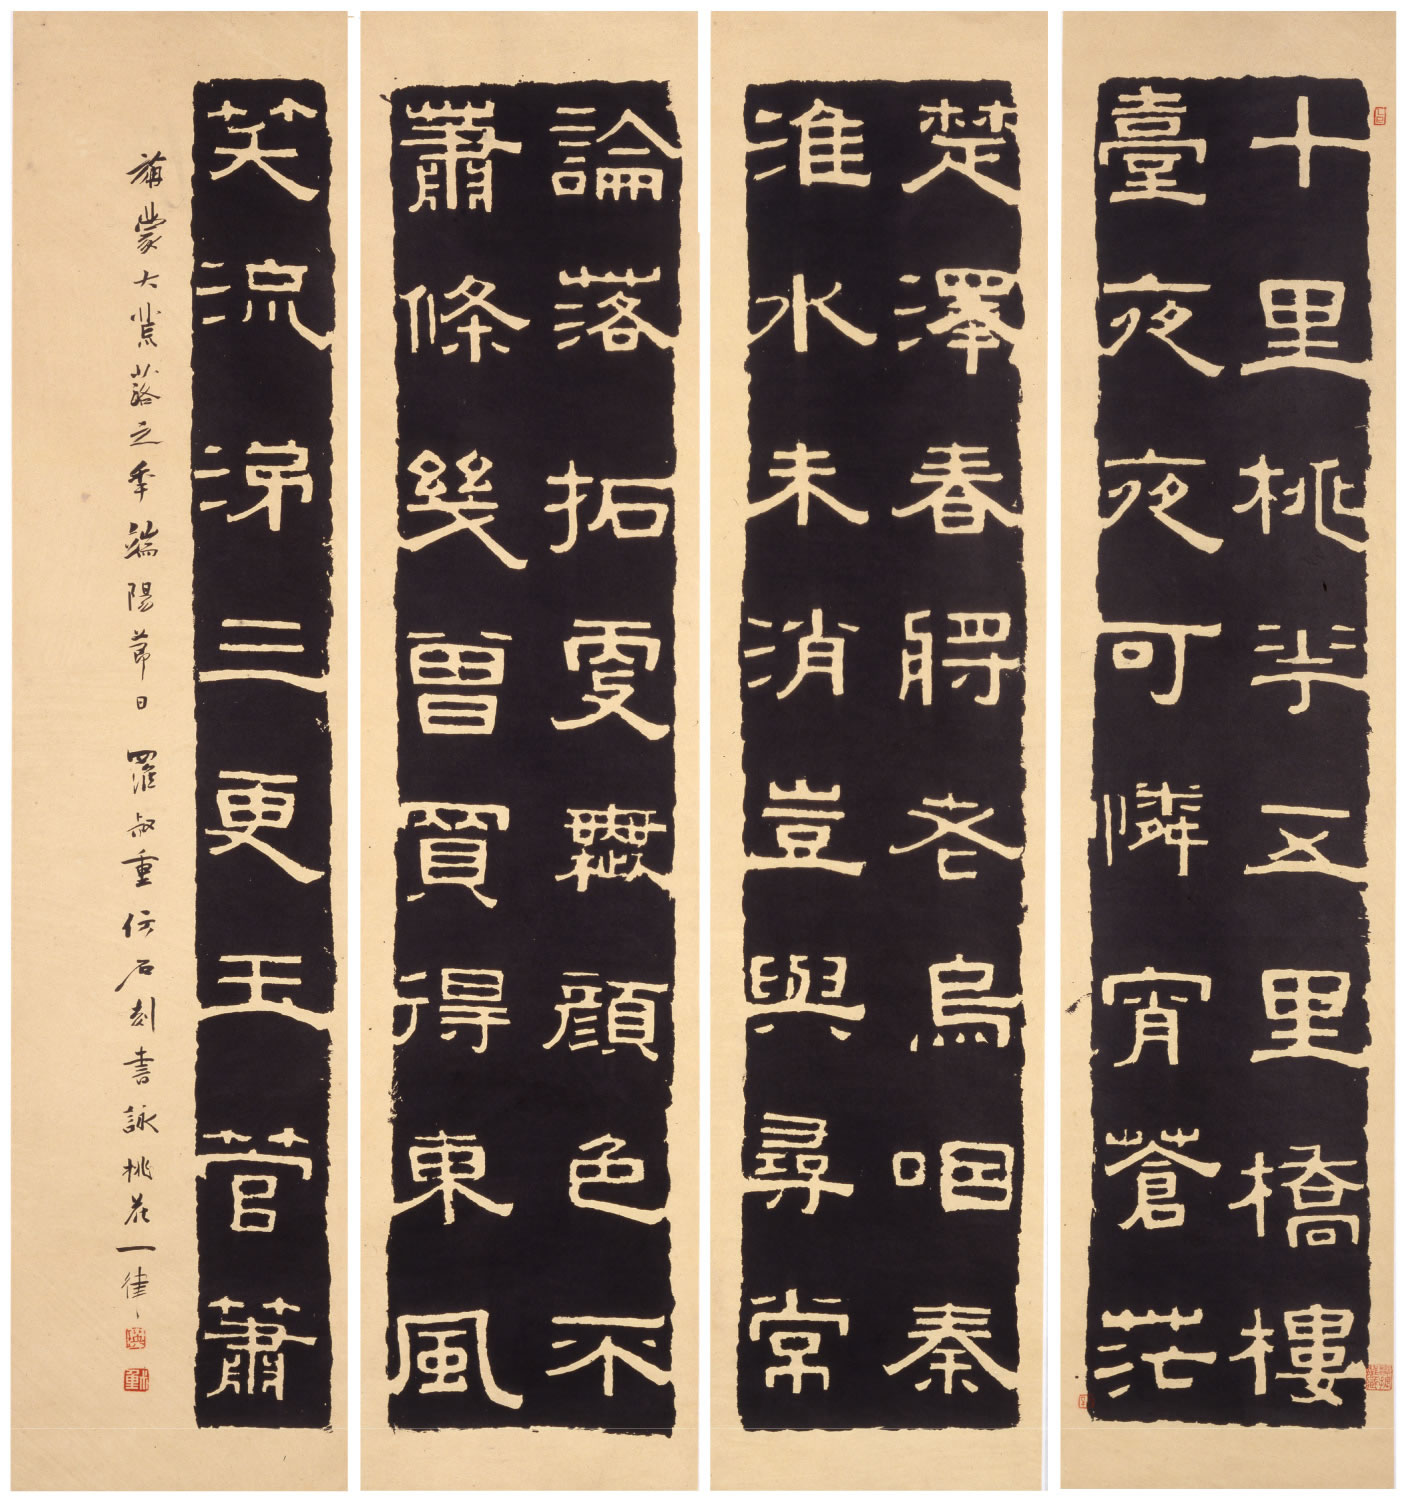 Poem on peach blossoms in clerical script